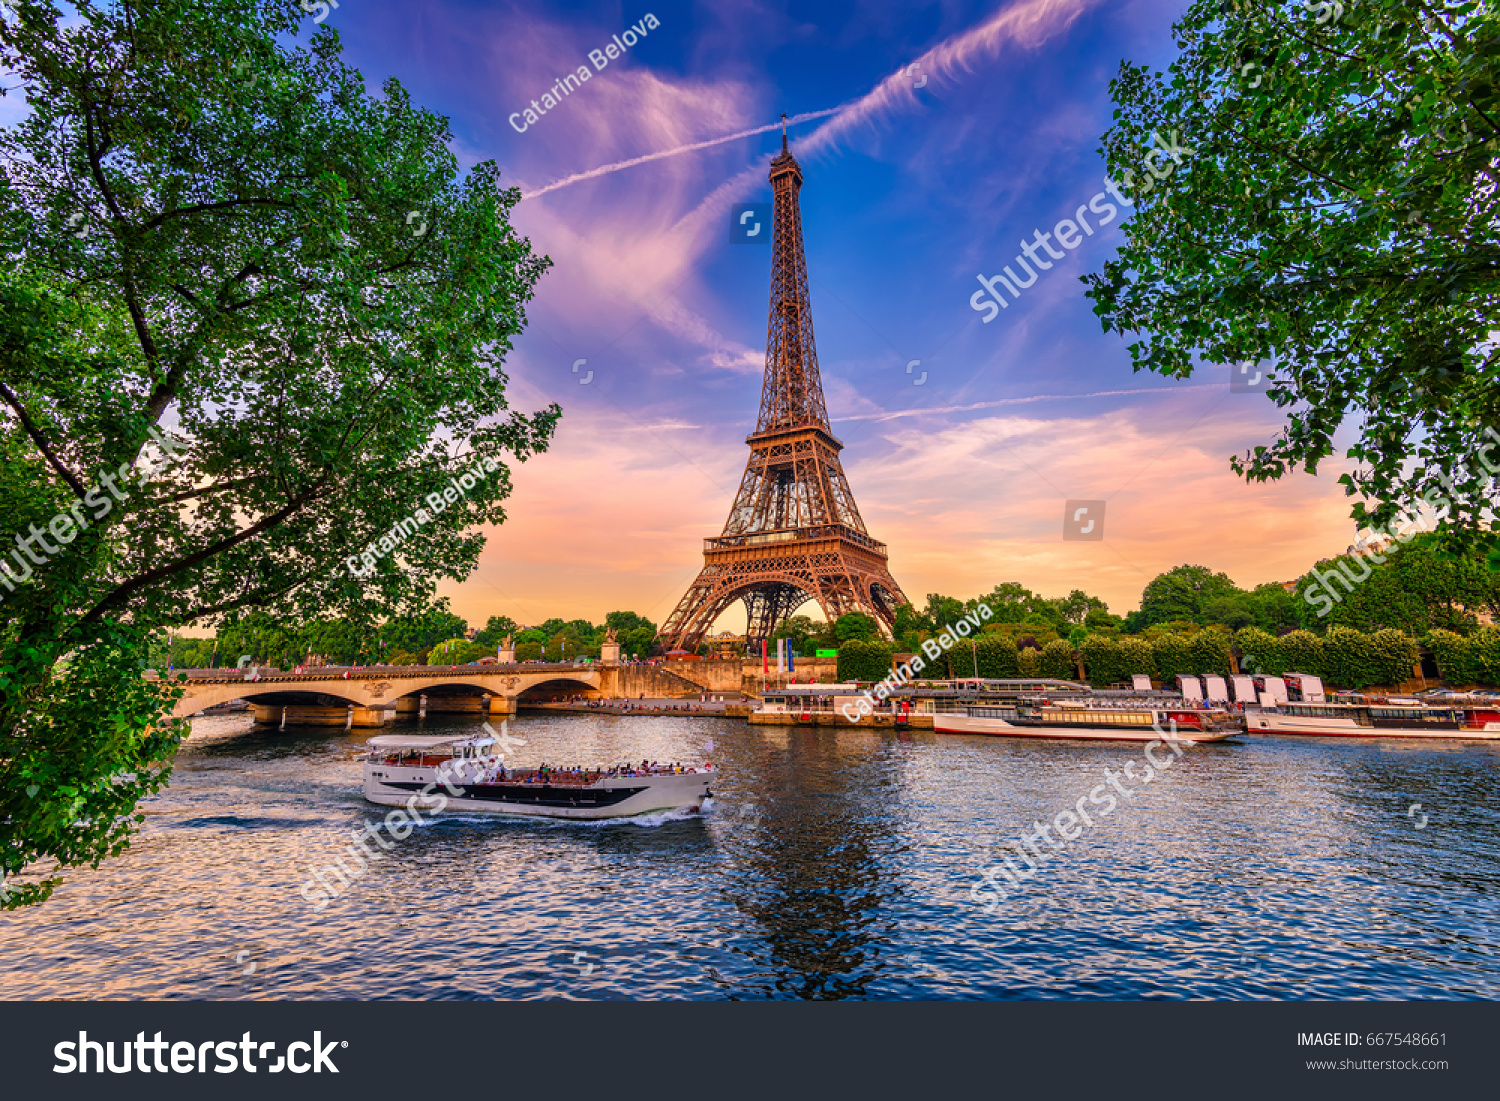 Paris Eiffel Tower and river Seine at sunset in Paris, France. Eiffel Tower is one of the most iconic landmarks of Paris. #667548661